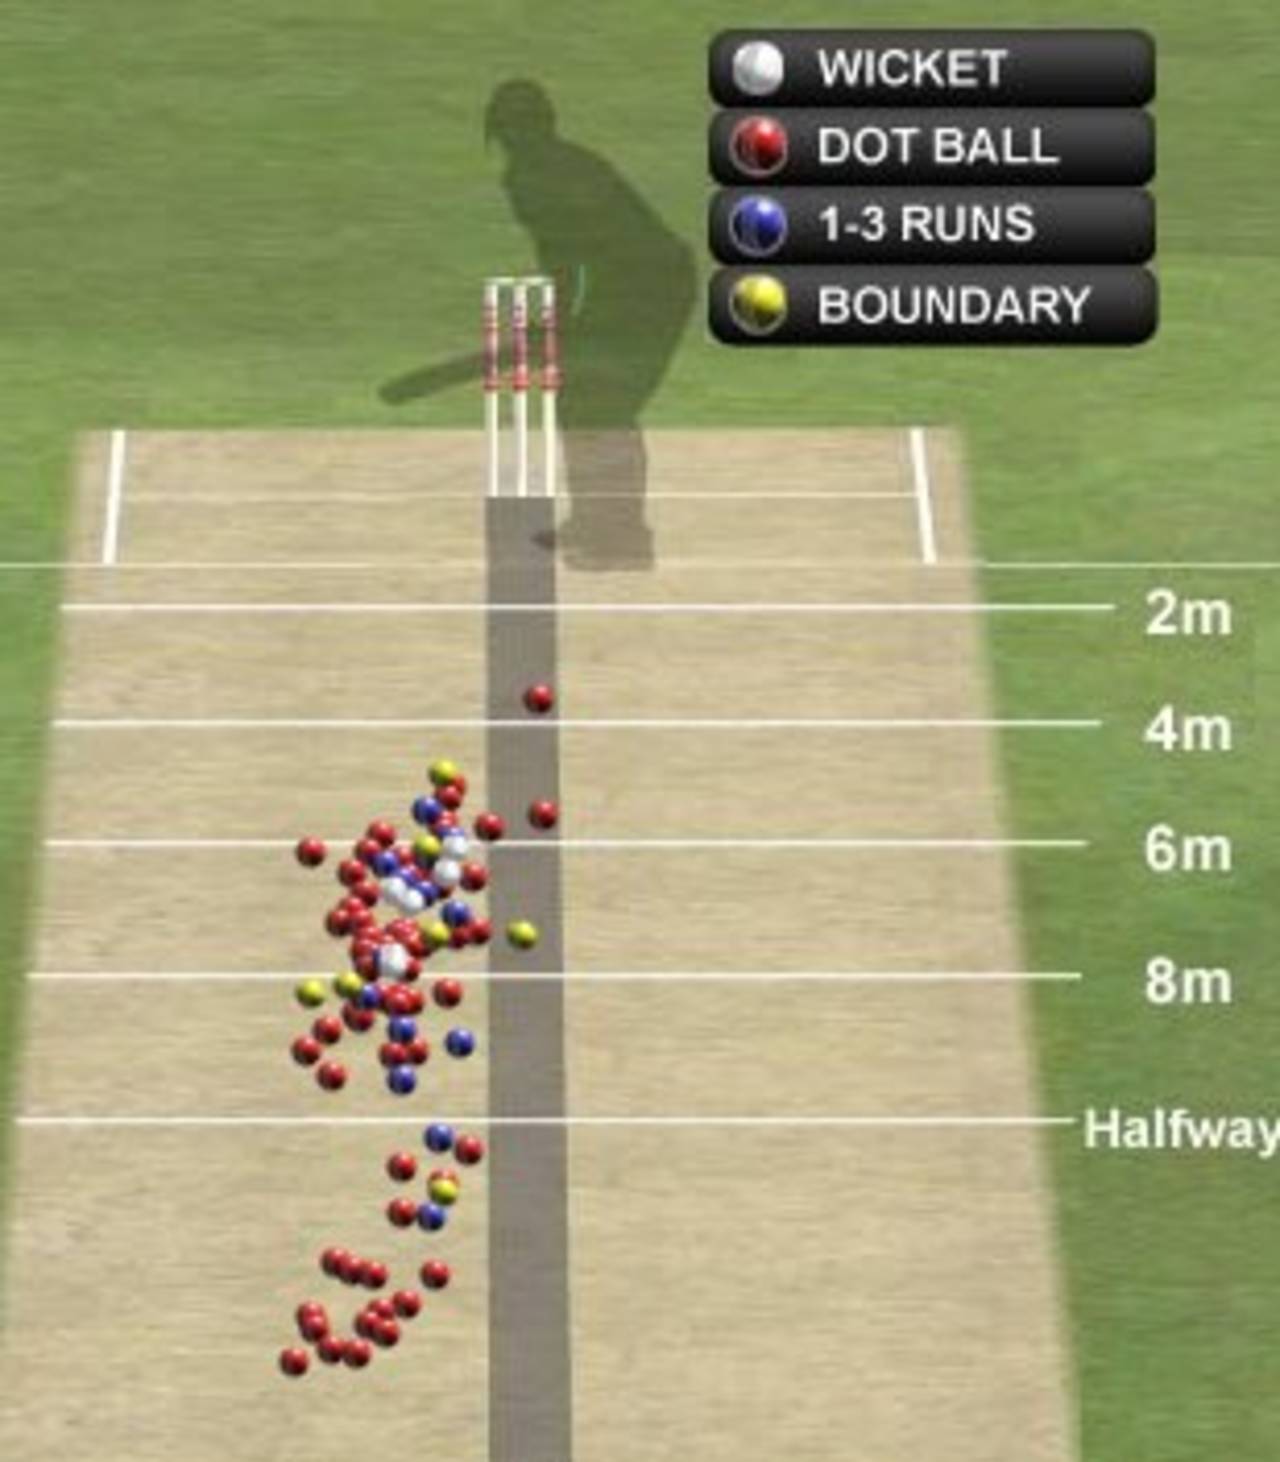 Dale Steyn was impeccable with his line and length, hardly giving the batsmen anything on their pads or anything to drive (<a href="/indvrsa2010/engine/match/441825.html?view=hawkeye" target="_blank">Click here</a> for more Hawk-Eye analysis)&nbsp;&nbsp;&bull;&nbsp;&nbsp;Hawk-Eye Innovations